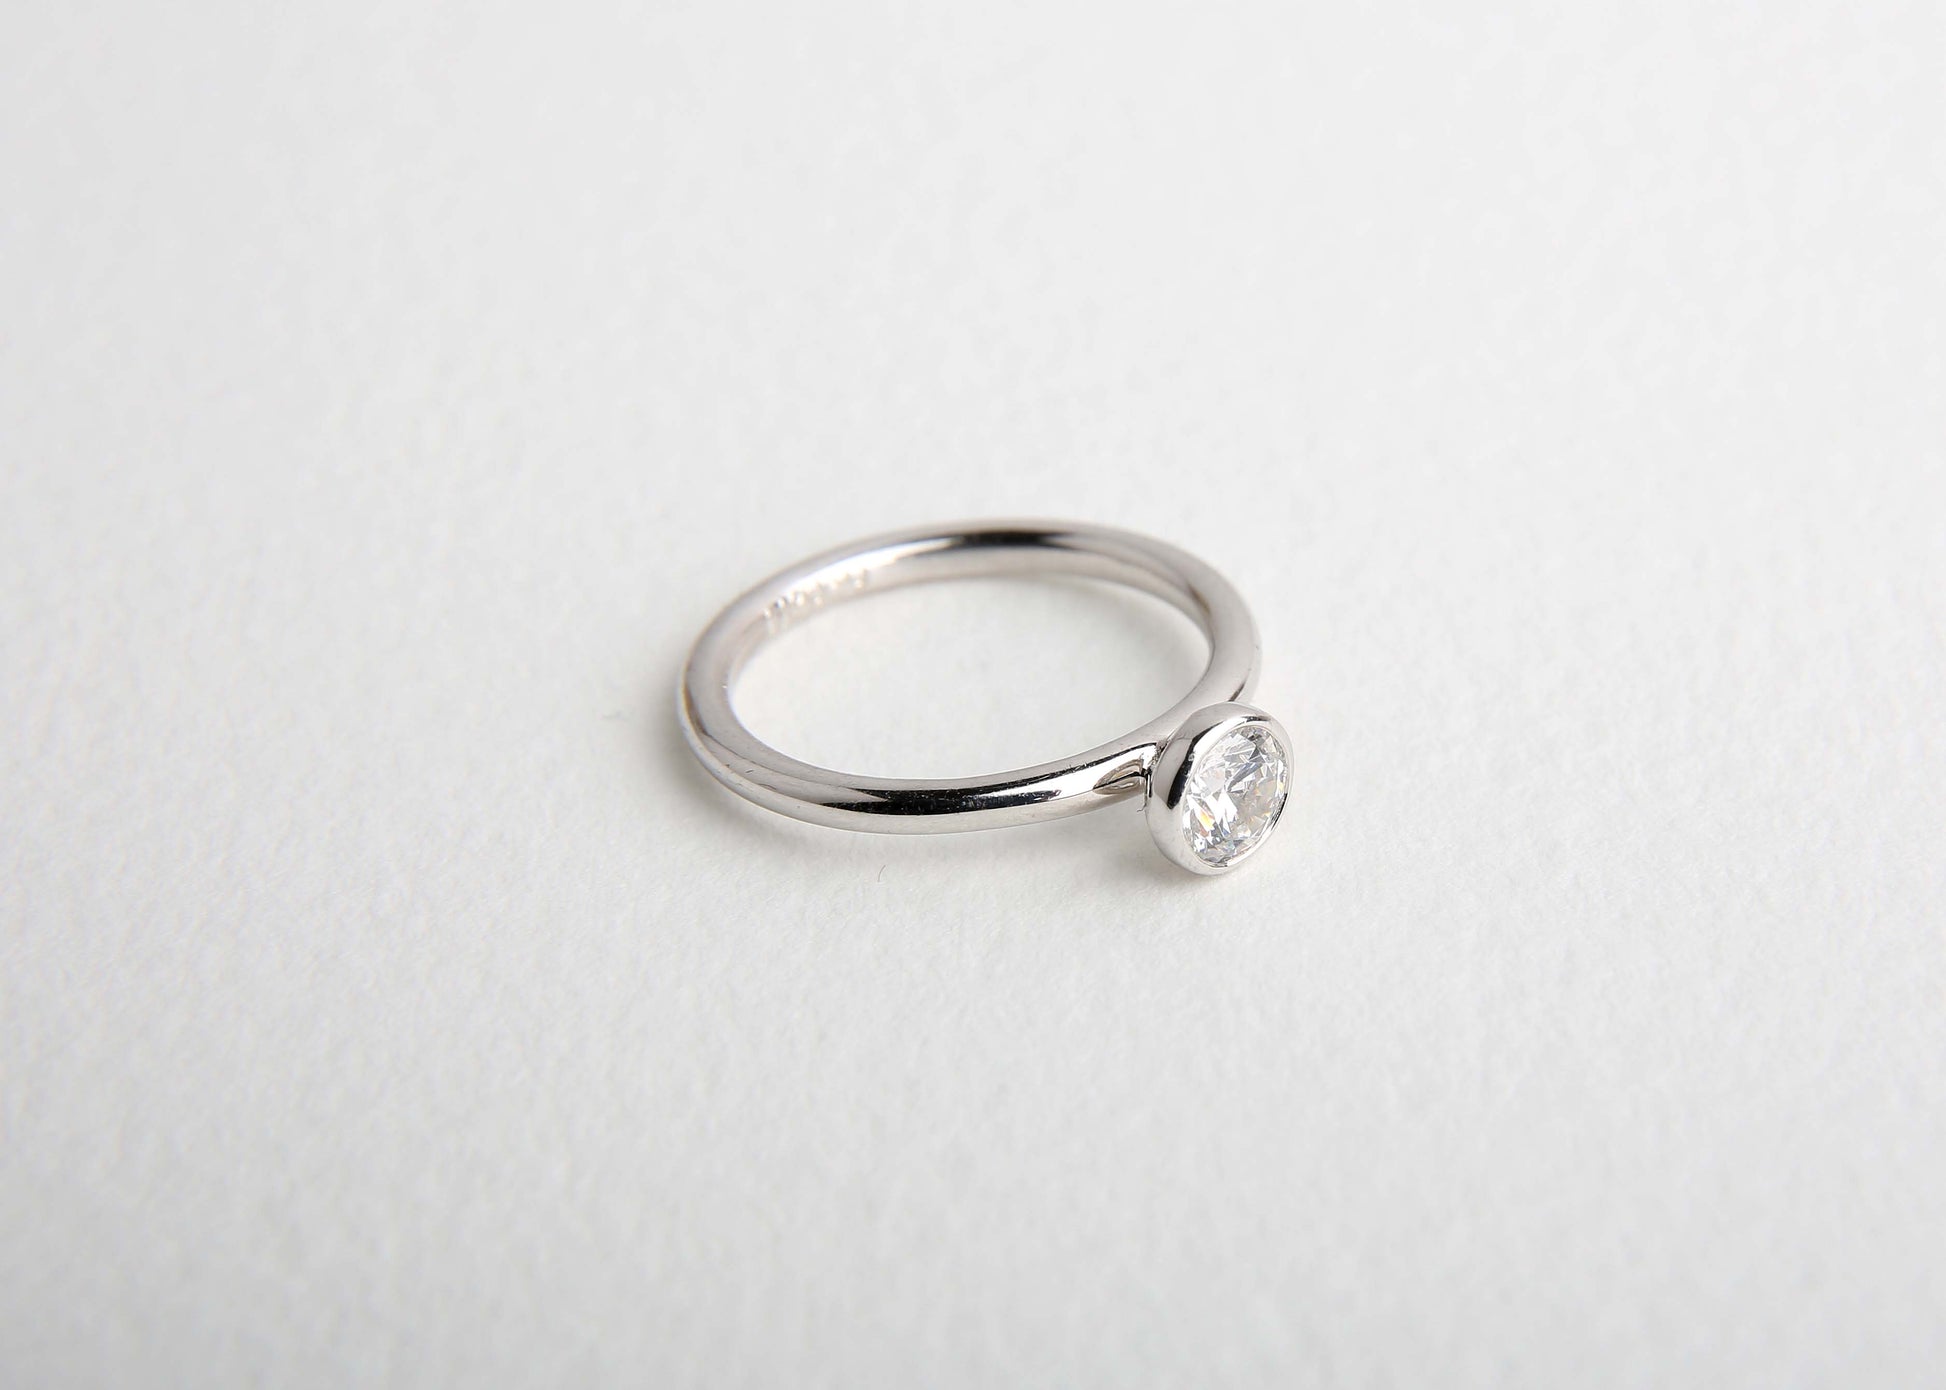 Modern diamond solitaire ring on white background